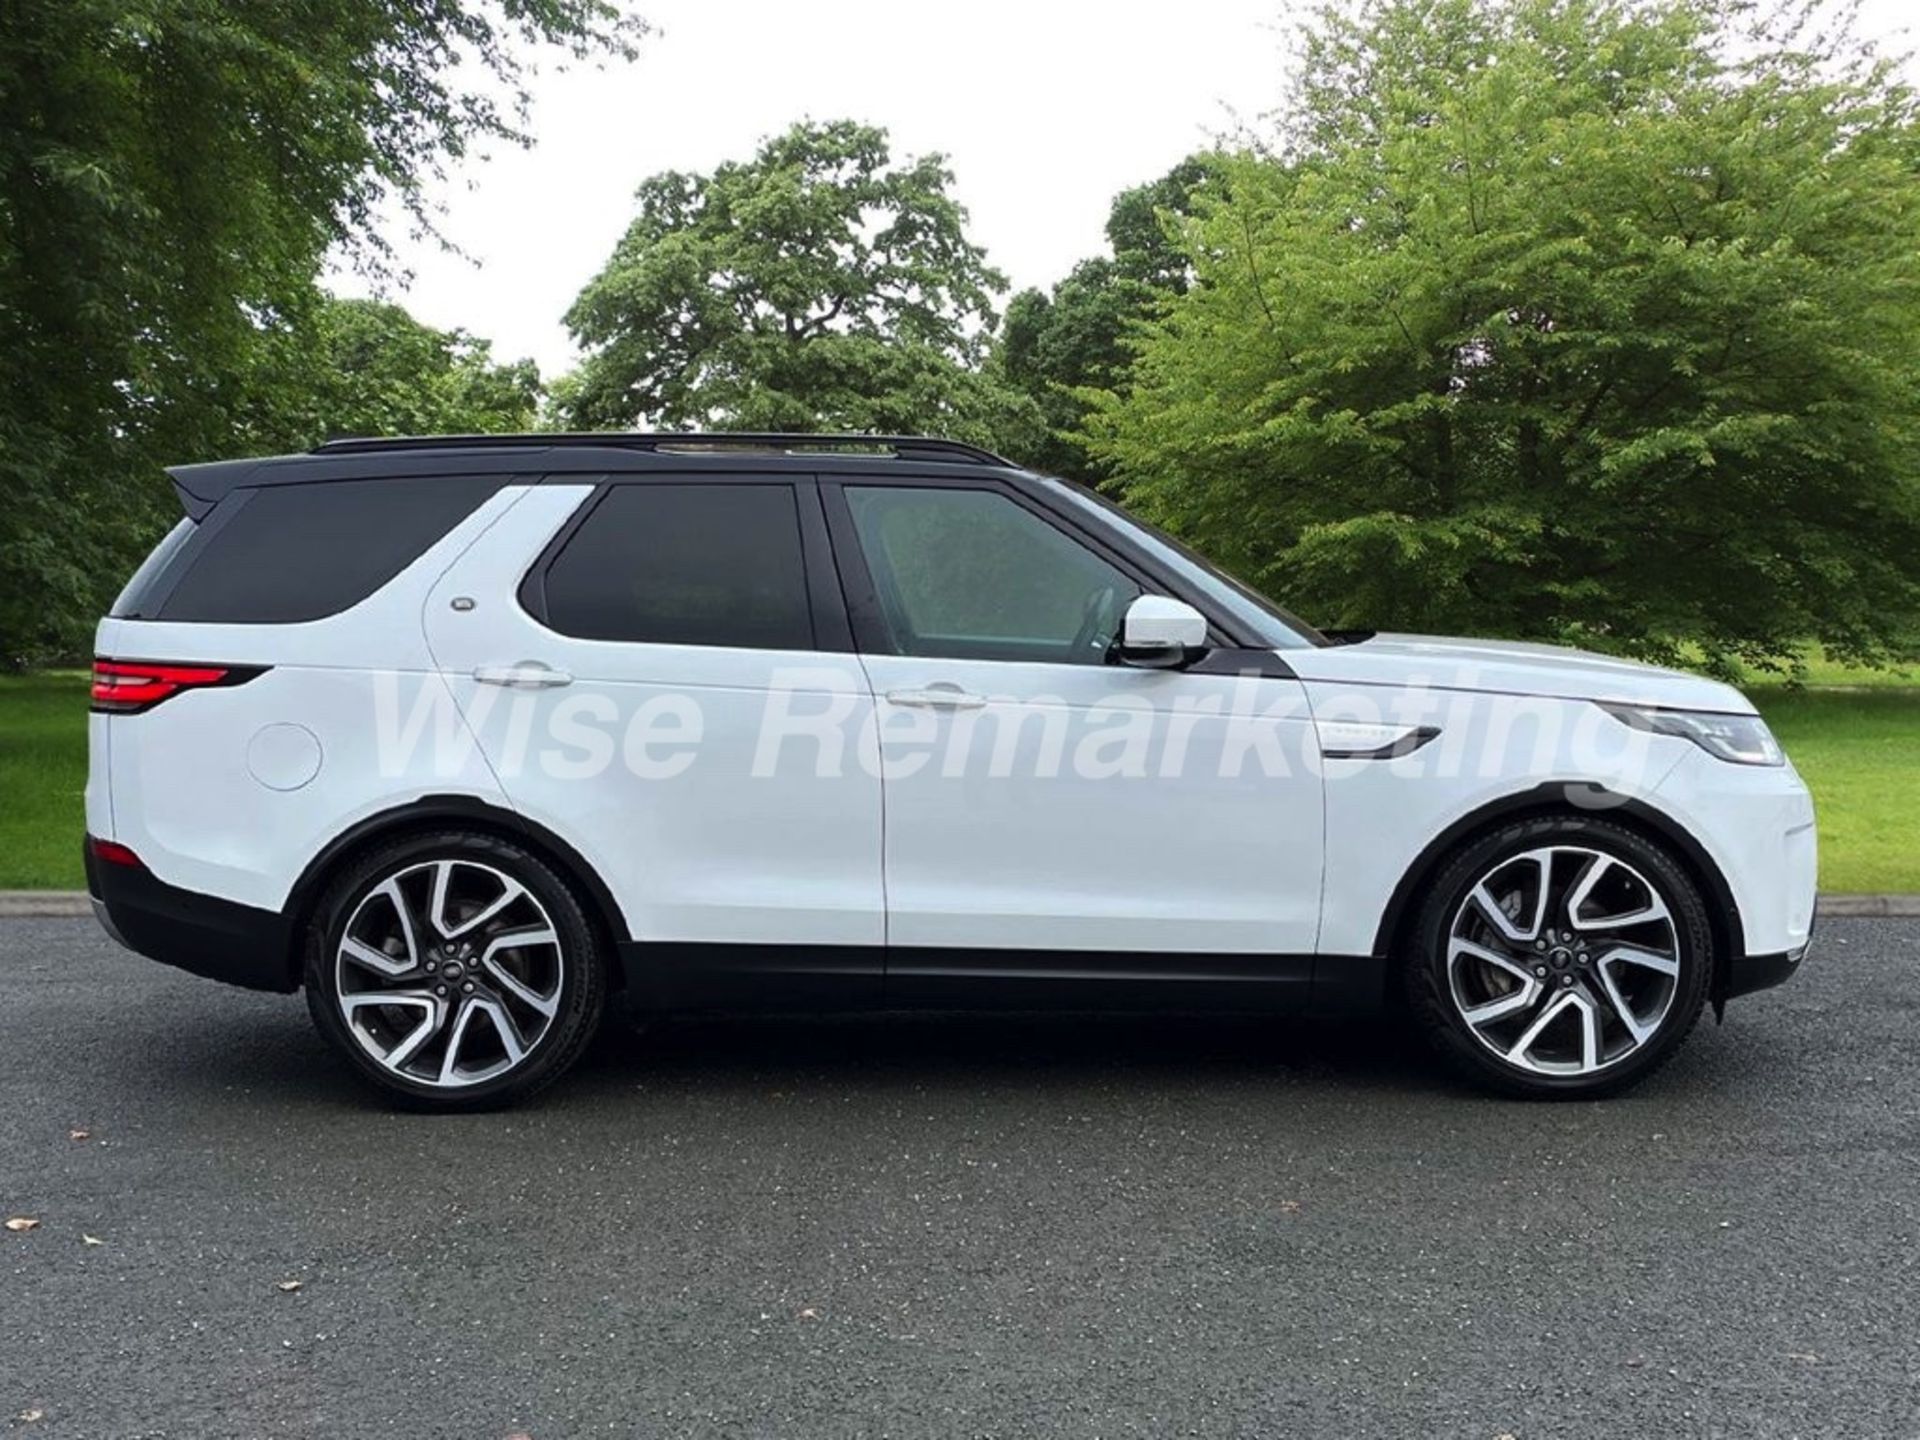 Land Rover Discovery 5 * SUV* (2017 - 67 Reg) *3.0 TD6 - 8 Speed Automatic* (ALL NEW MODEL) - Image 7 of 9